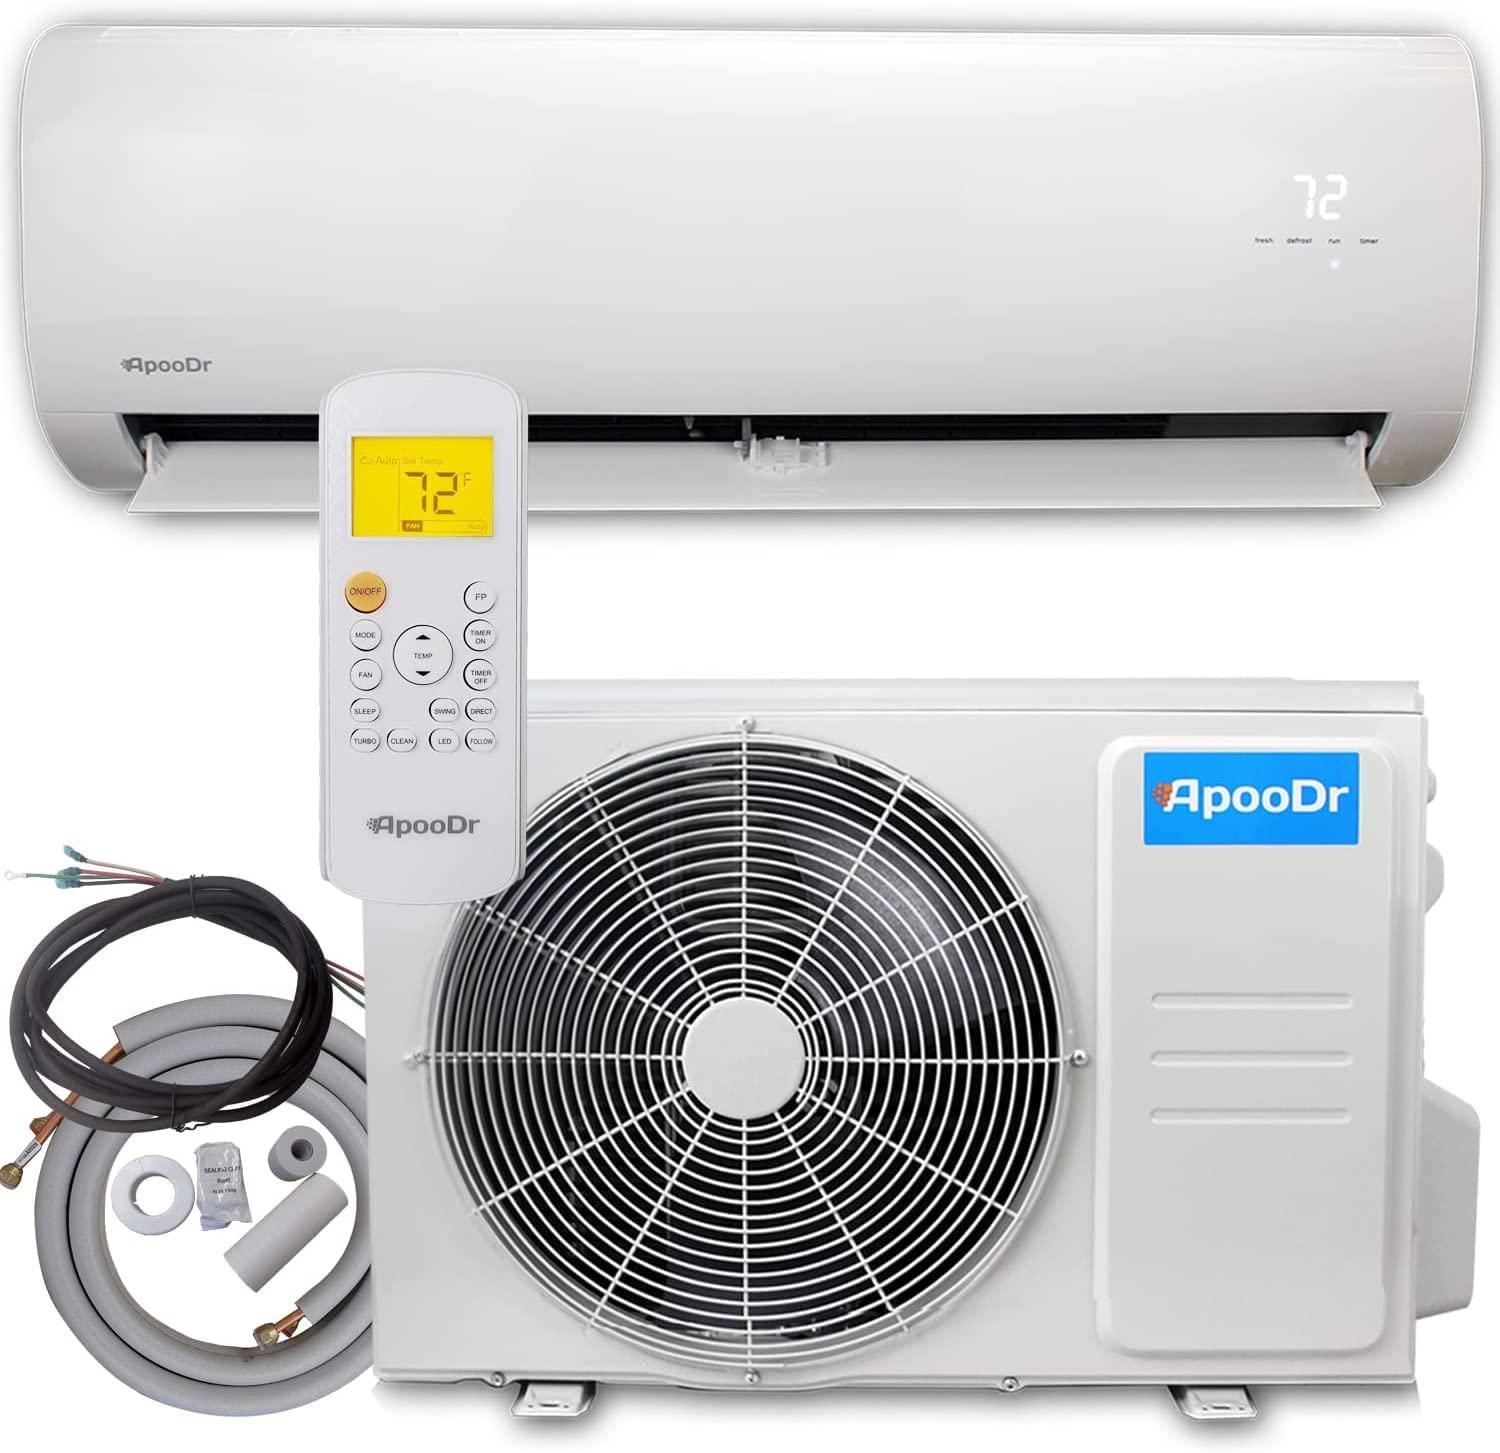 ApooDr 12000 BTU Mini Split Air conditioner Ductless Inverter System 168 SEER with Heat Pump 220V 1 Ton,with Installation Kit